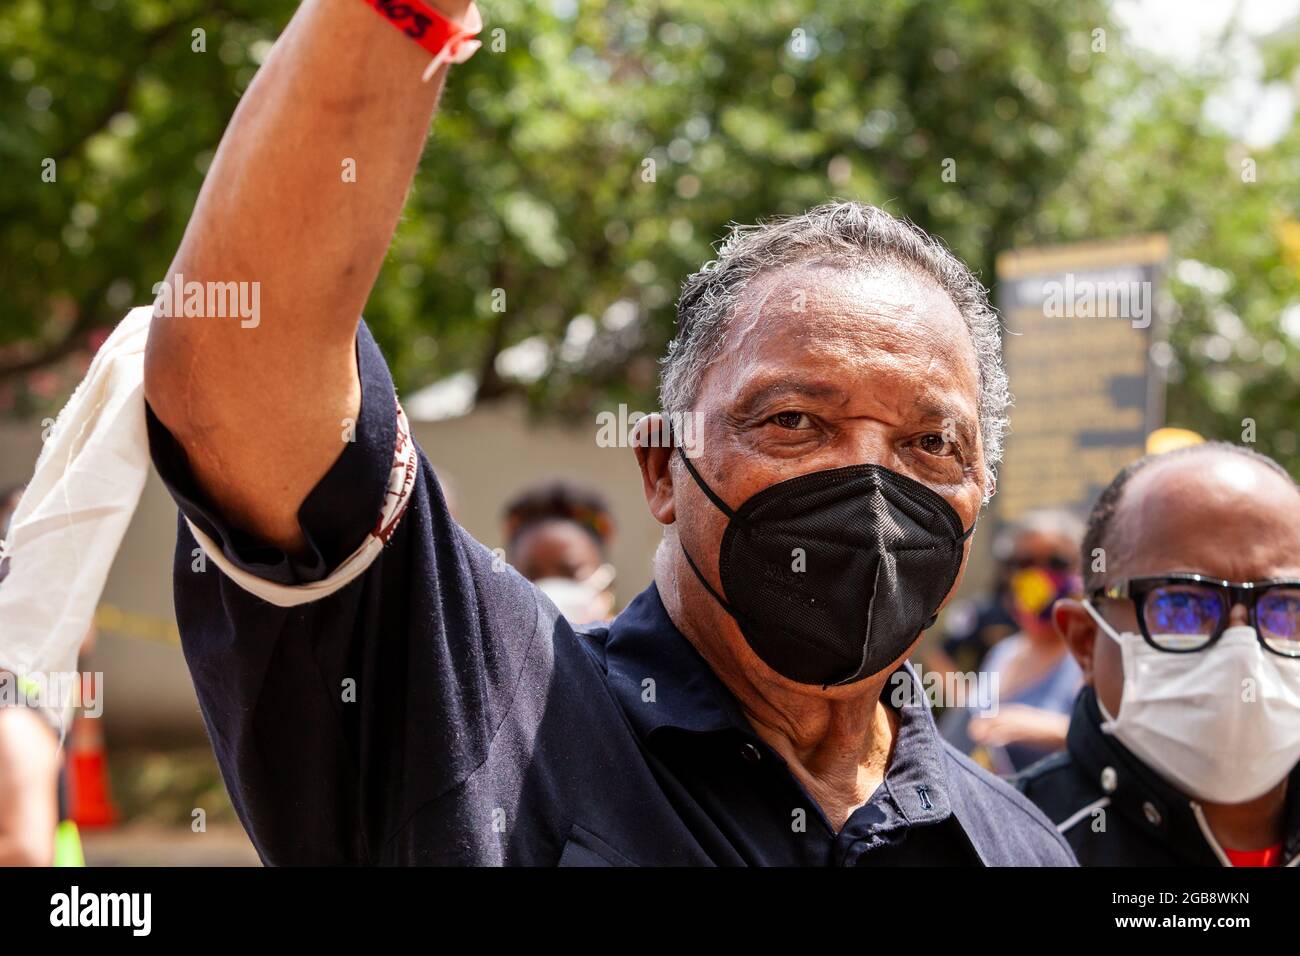 Washington, DC, USA, 2 August 2021.  Pictured: Rev. Jesse Jackson waves to supporters when he is released following a civil disobedience action with the Moral Monday March.  Protesters blocked the street in front of The Hart Senate Building, resulting in arrest by Capitol Police.  The march is sponsored by the Poor People’s Campaign, Kairos Center, and Repairers of the Breach.  Credit: Allison Bailey / Alamy Live News Stock Photo